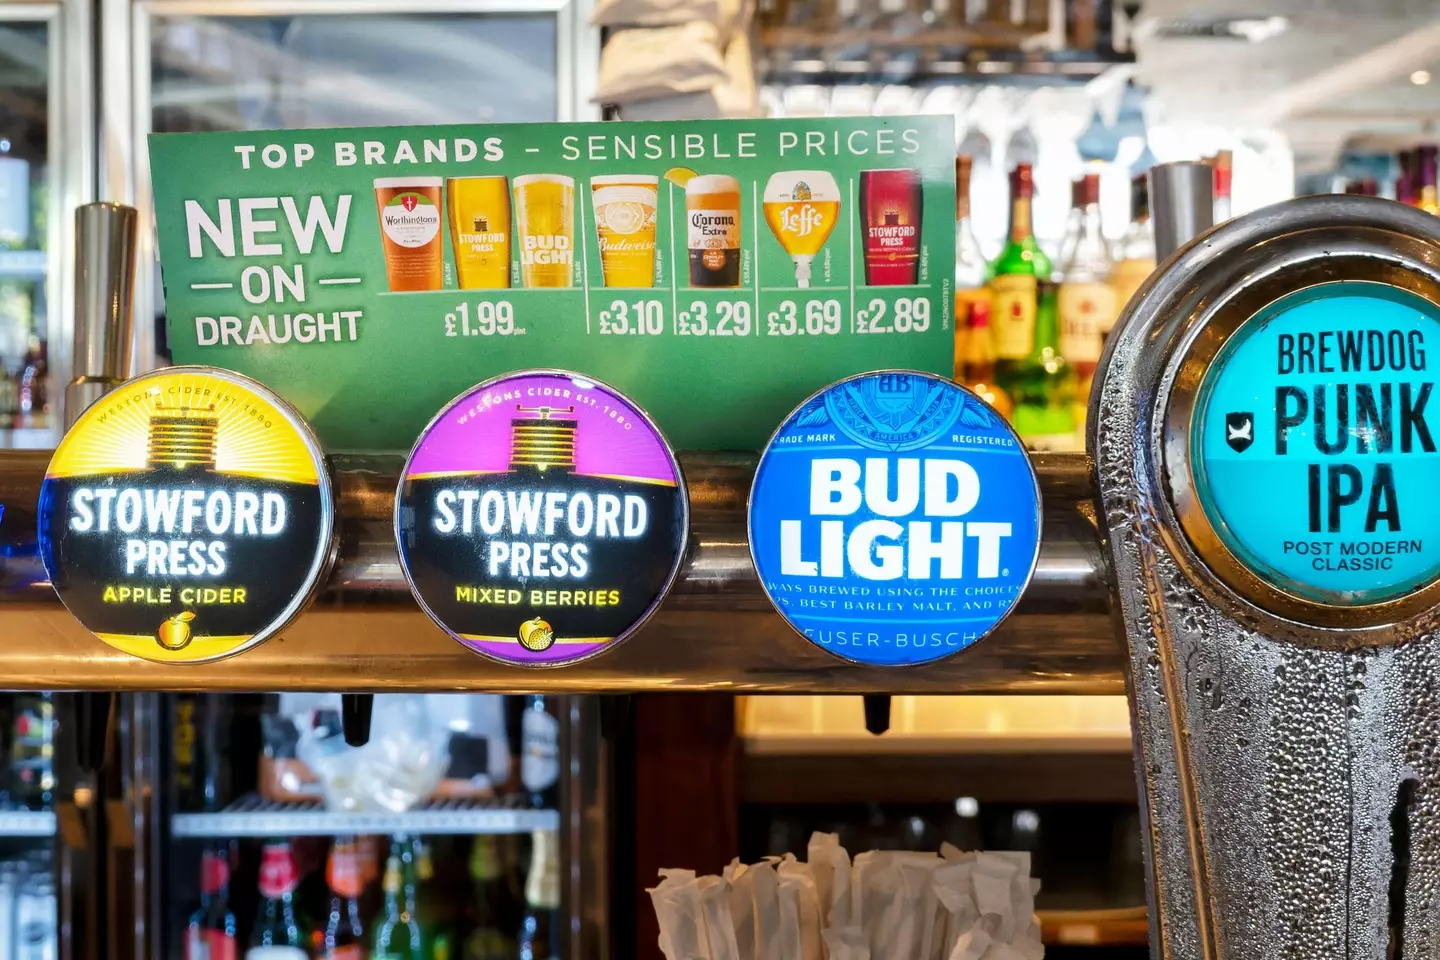 A pint of Kopparberg draught cider and a pint of Stowford Press Mixed Berries will only set you back under £2.